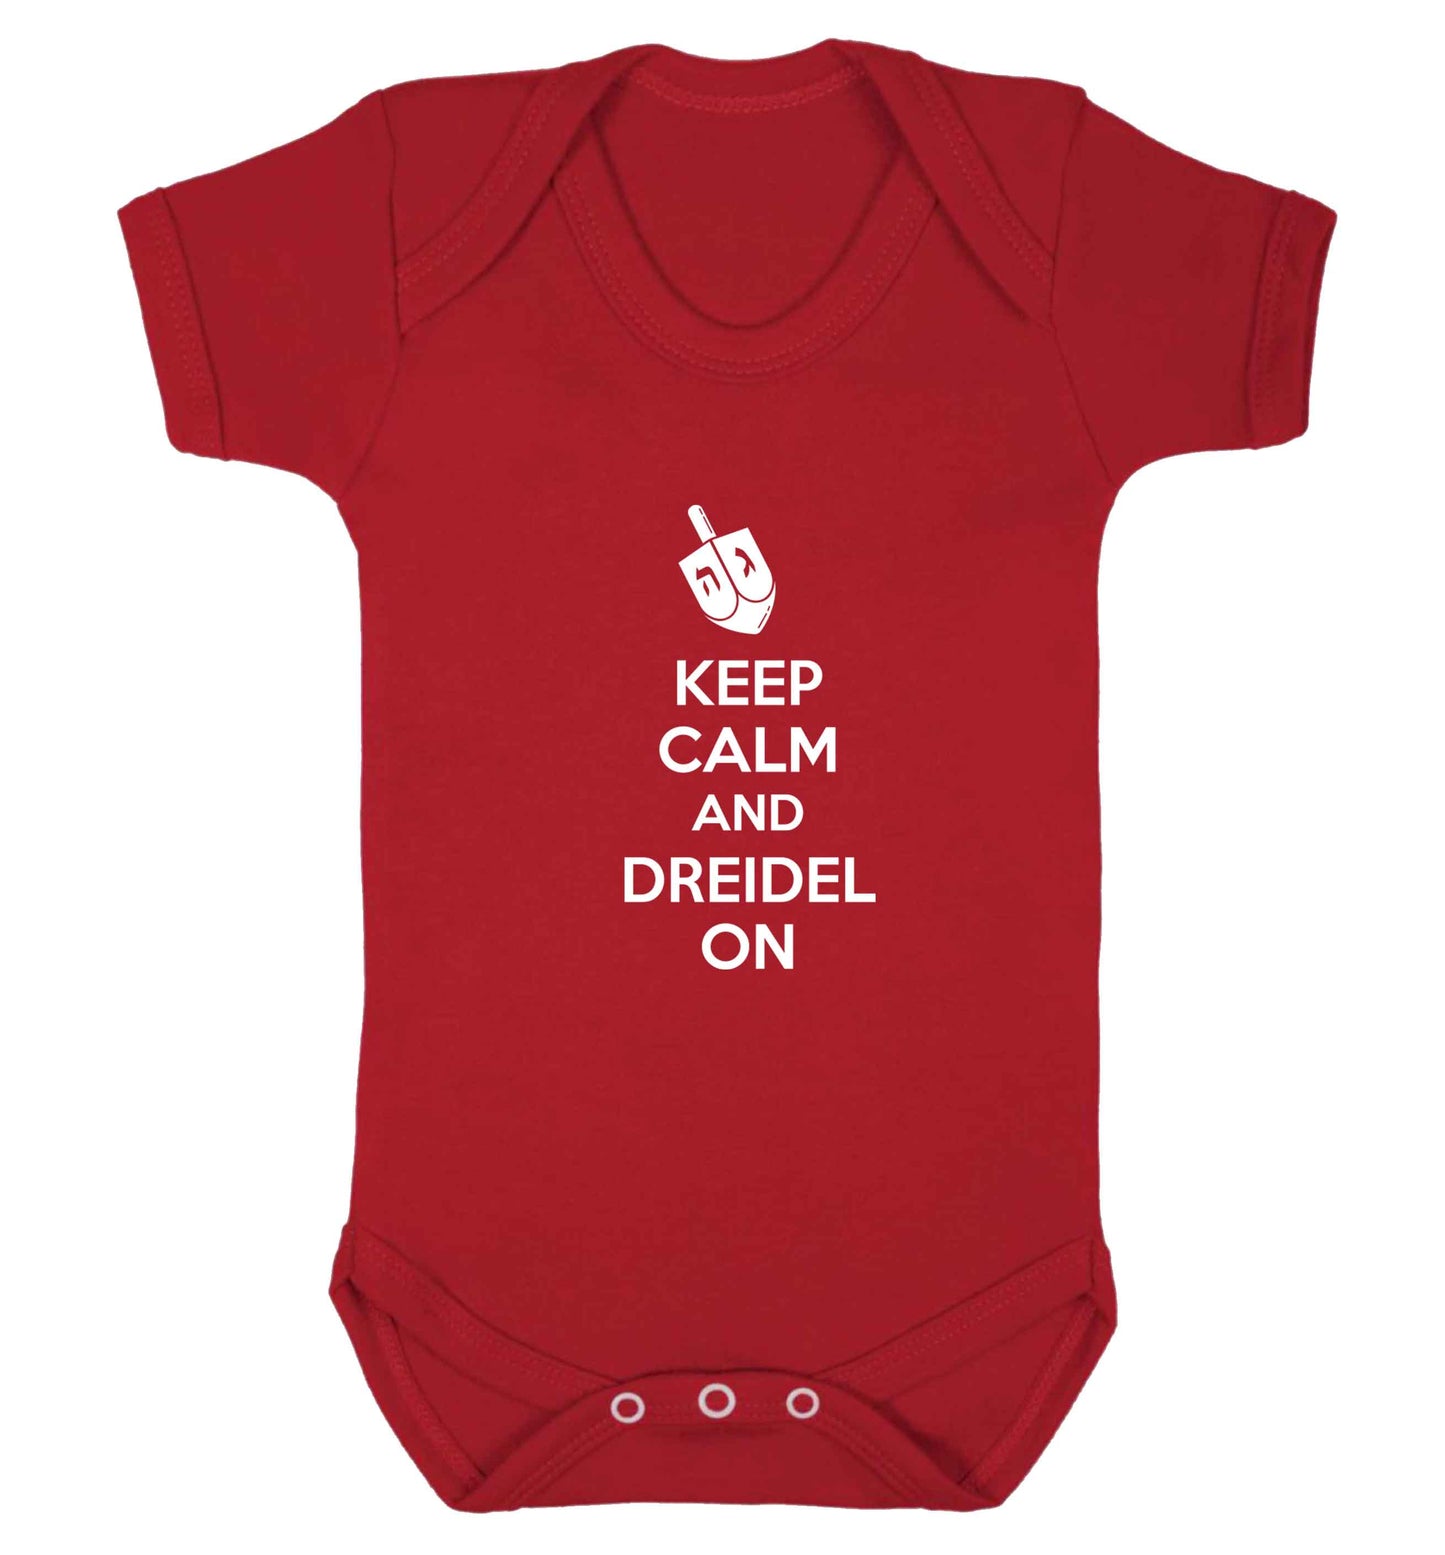 Keep calm and dreidel on baby vest red 18-24 months